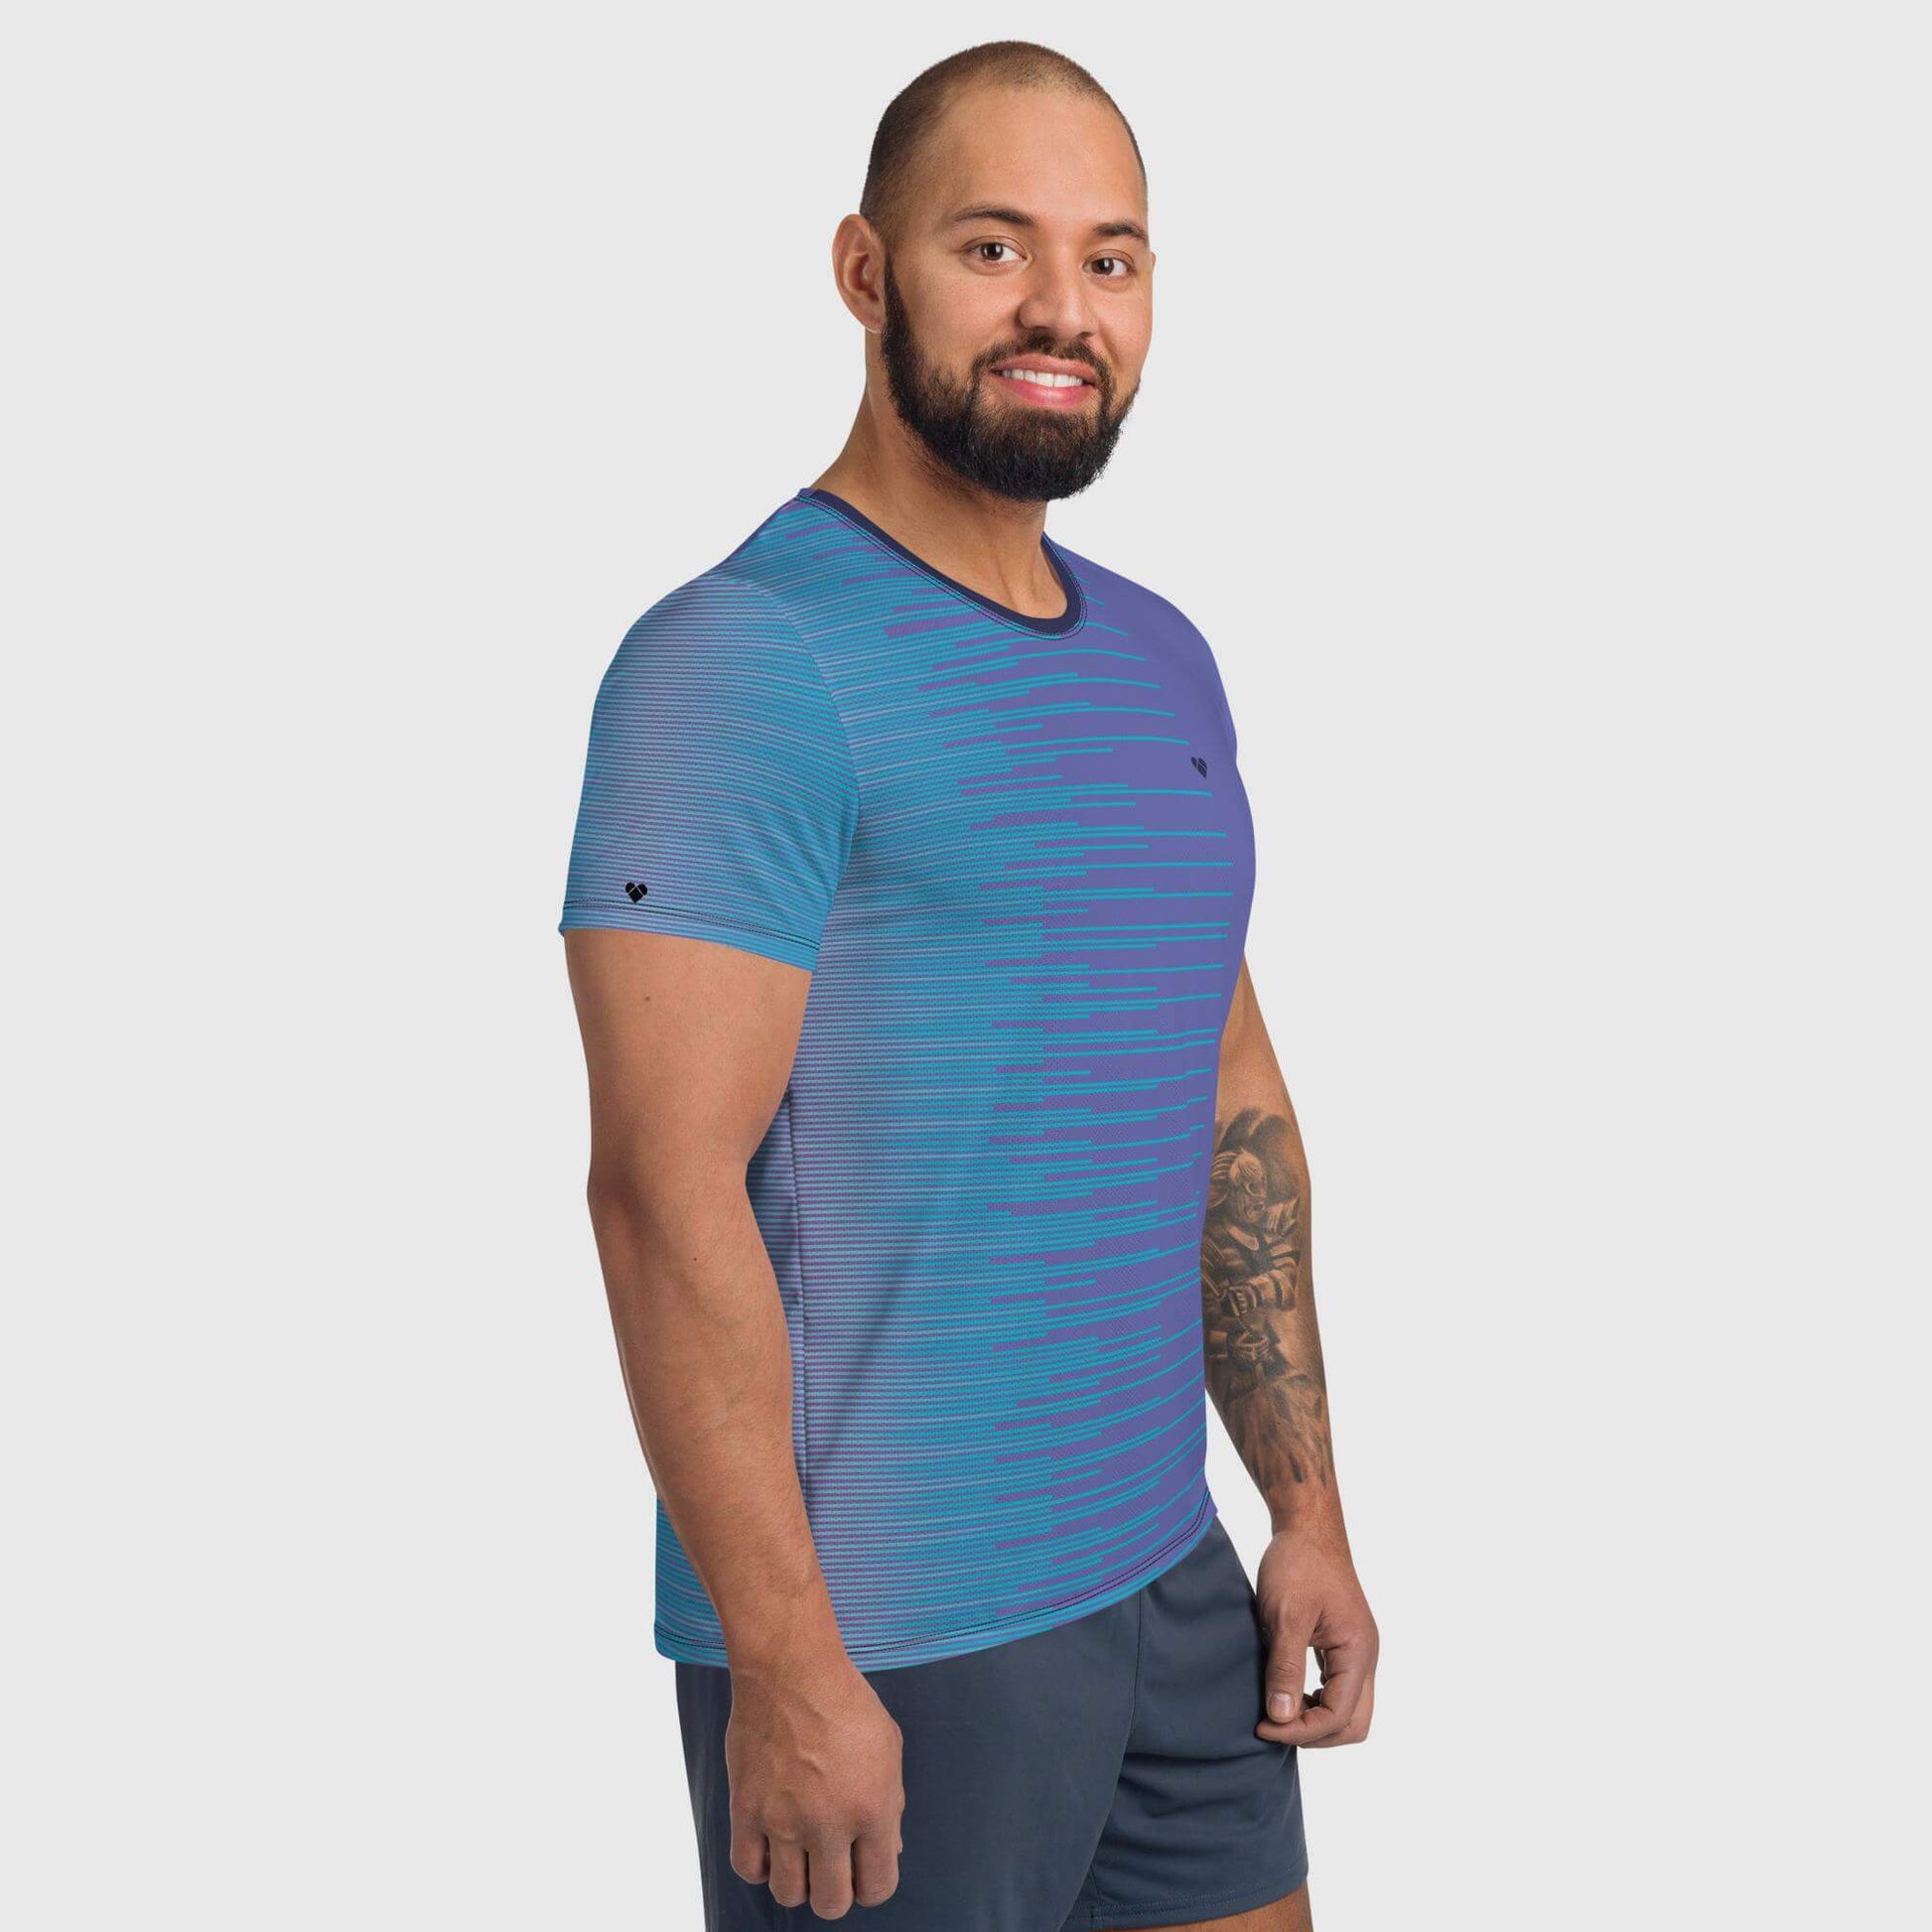 Designer Sport Shirt with Periwinkle Stripes